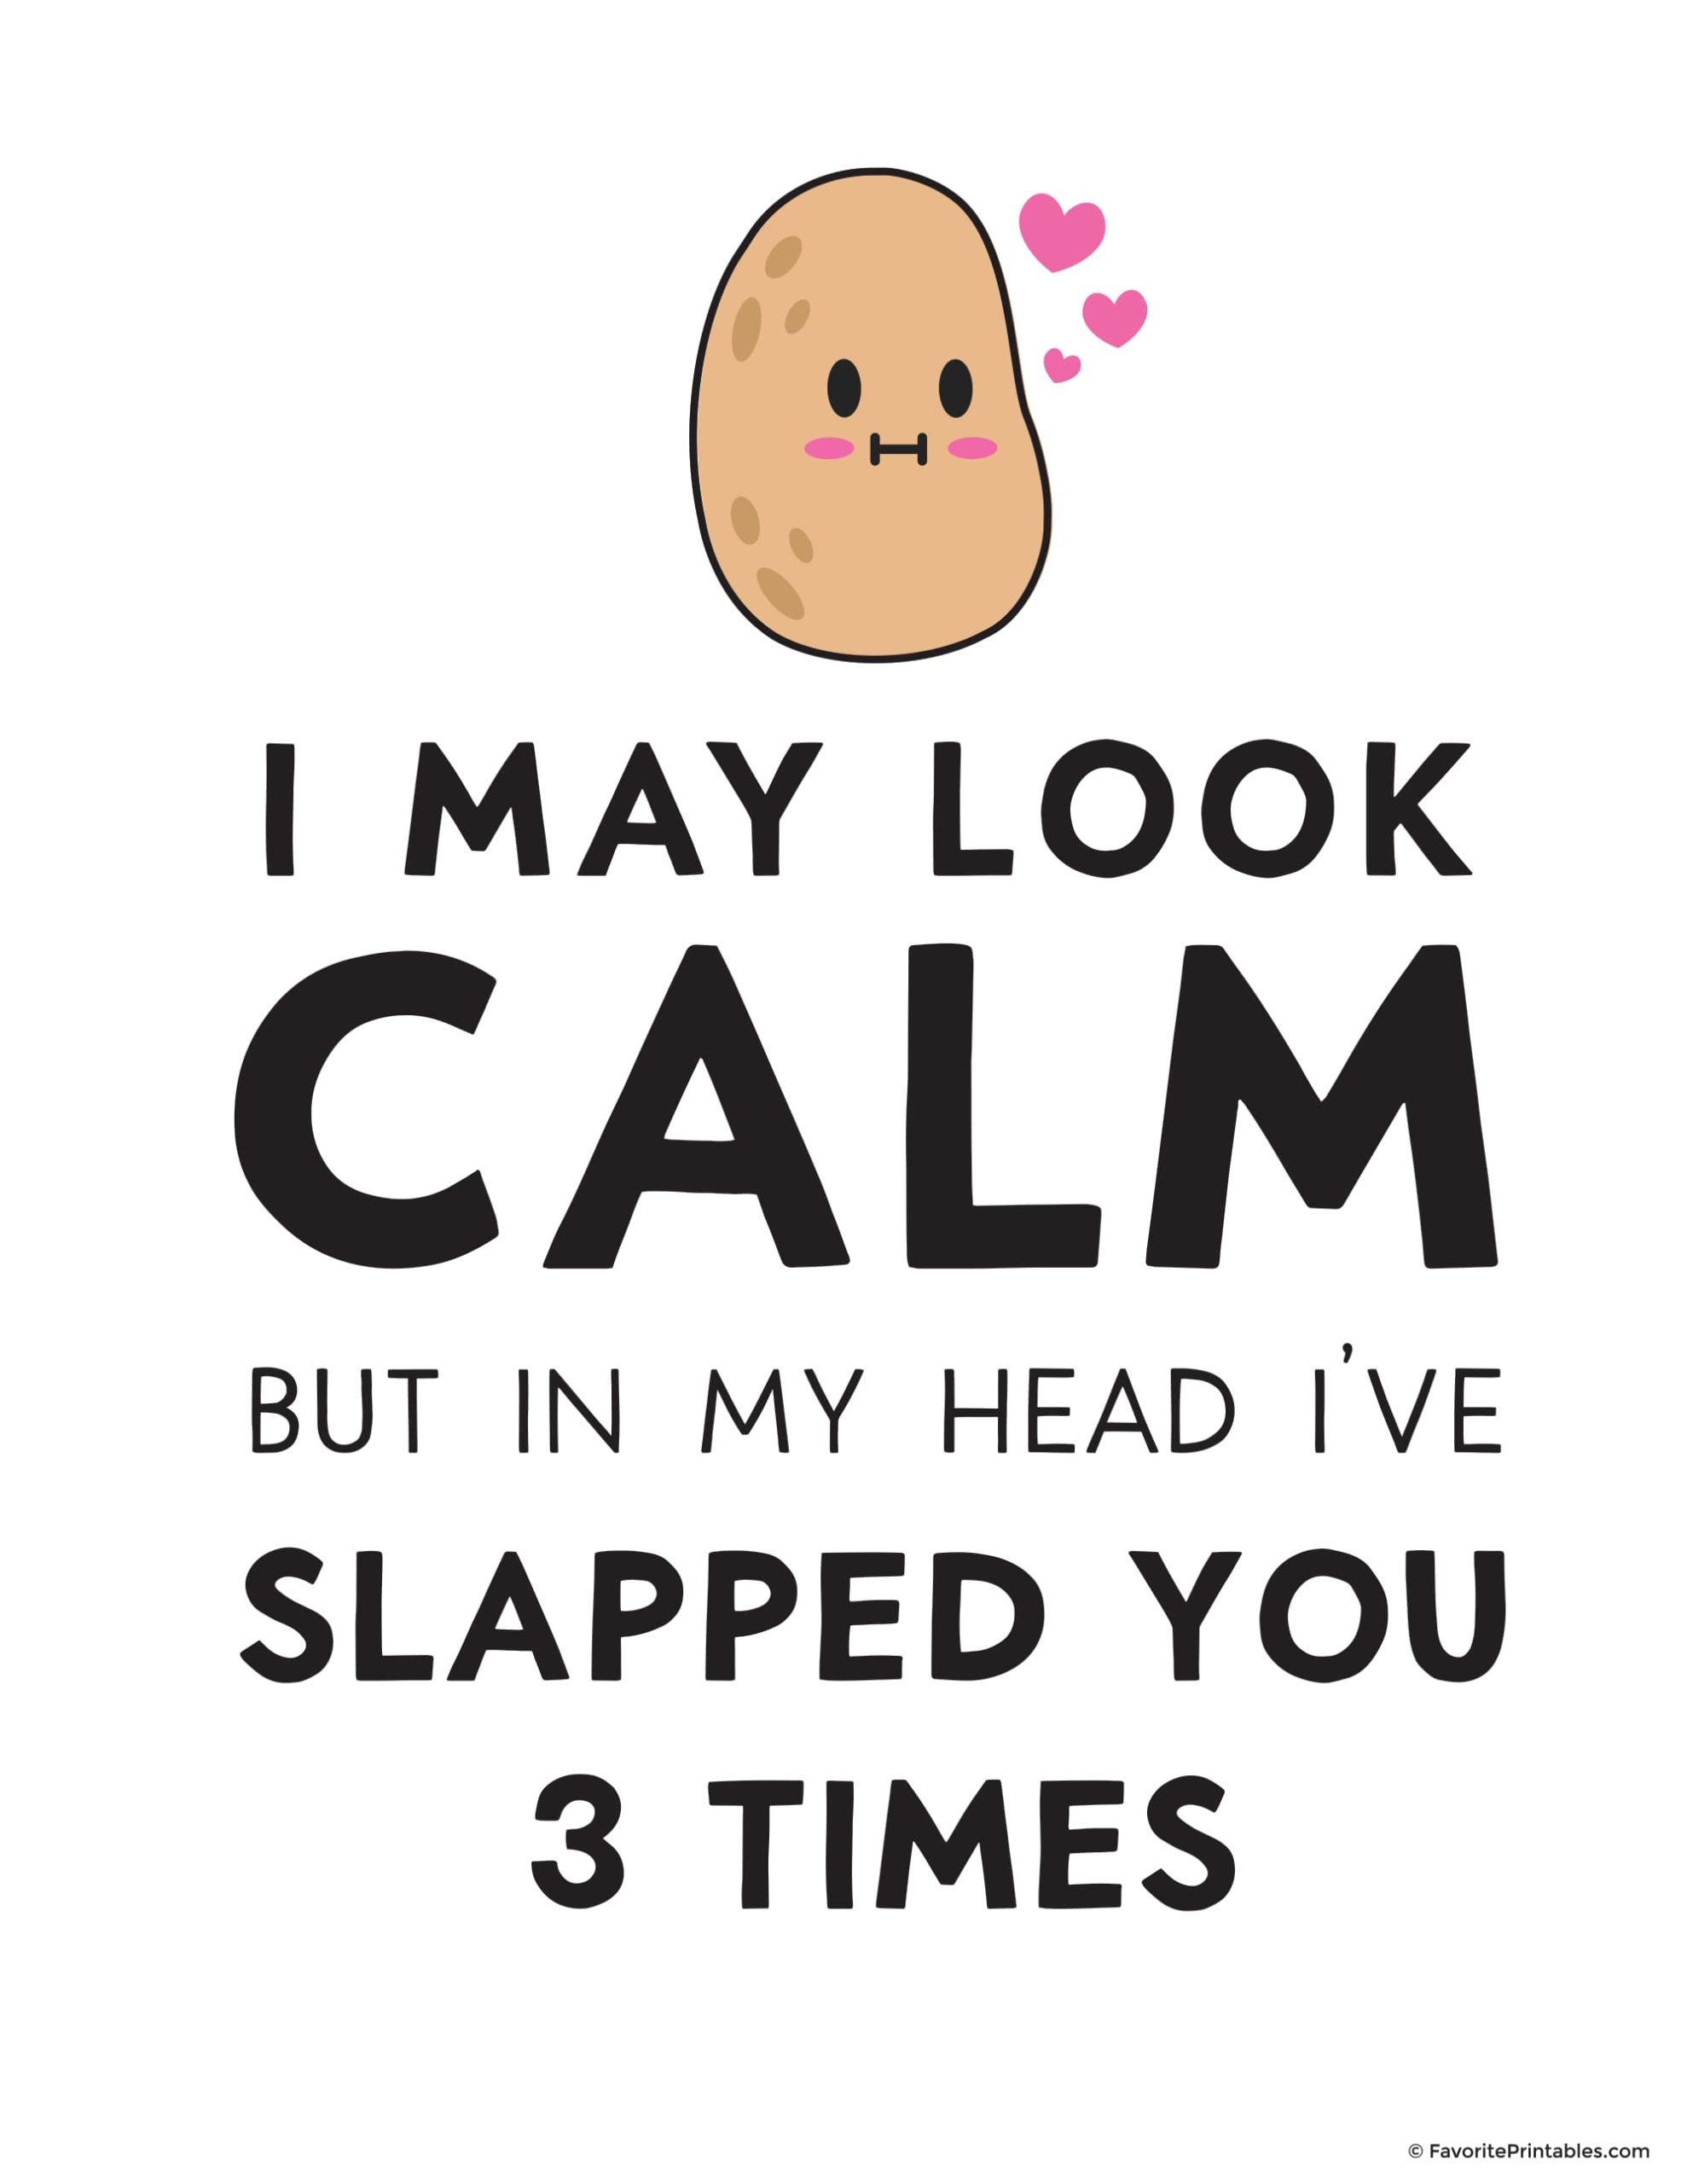 "I may look calm but in my head i've slapped you three times" image with a potato.